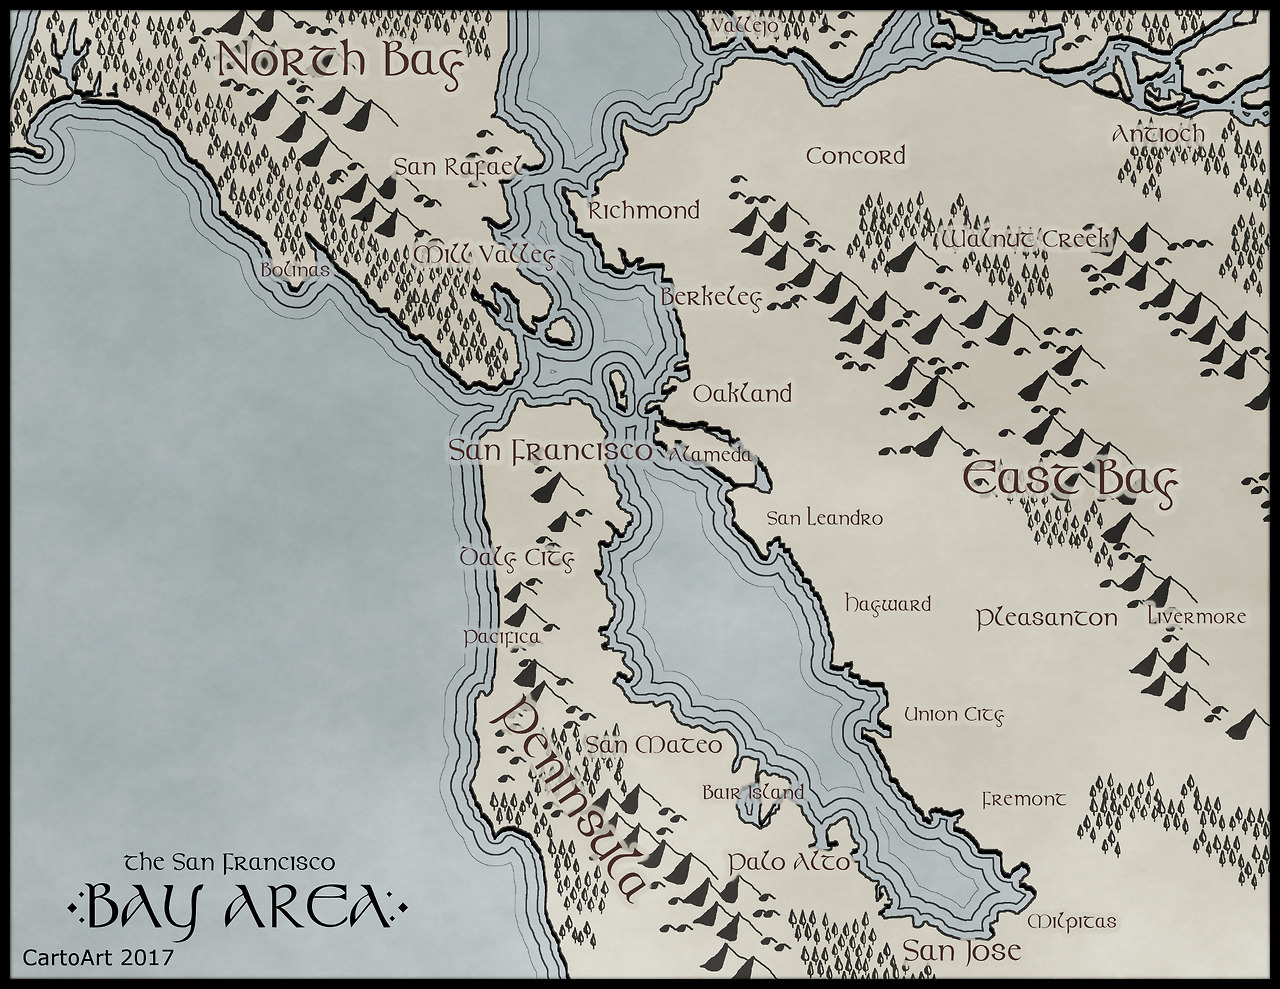 Fantasy map of the San Francisco Bay Area. — Immediately post your art to a topic and get feedback. Join our new community, EatSleepDraw Studio, today!